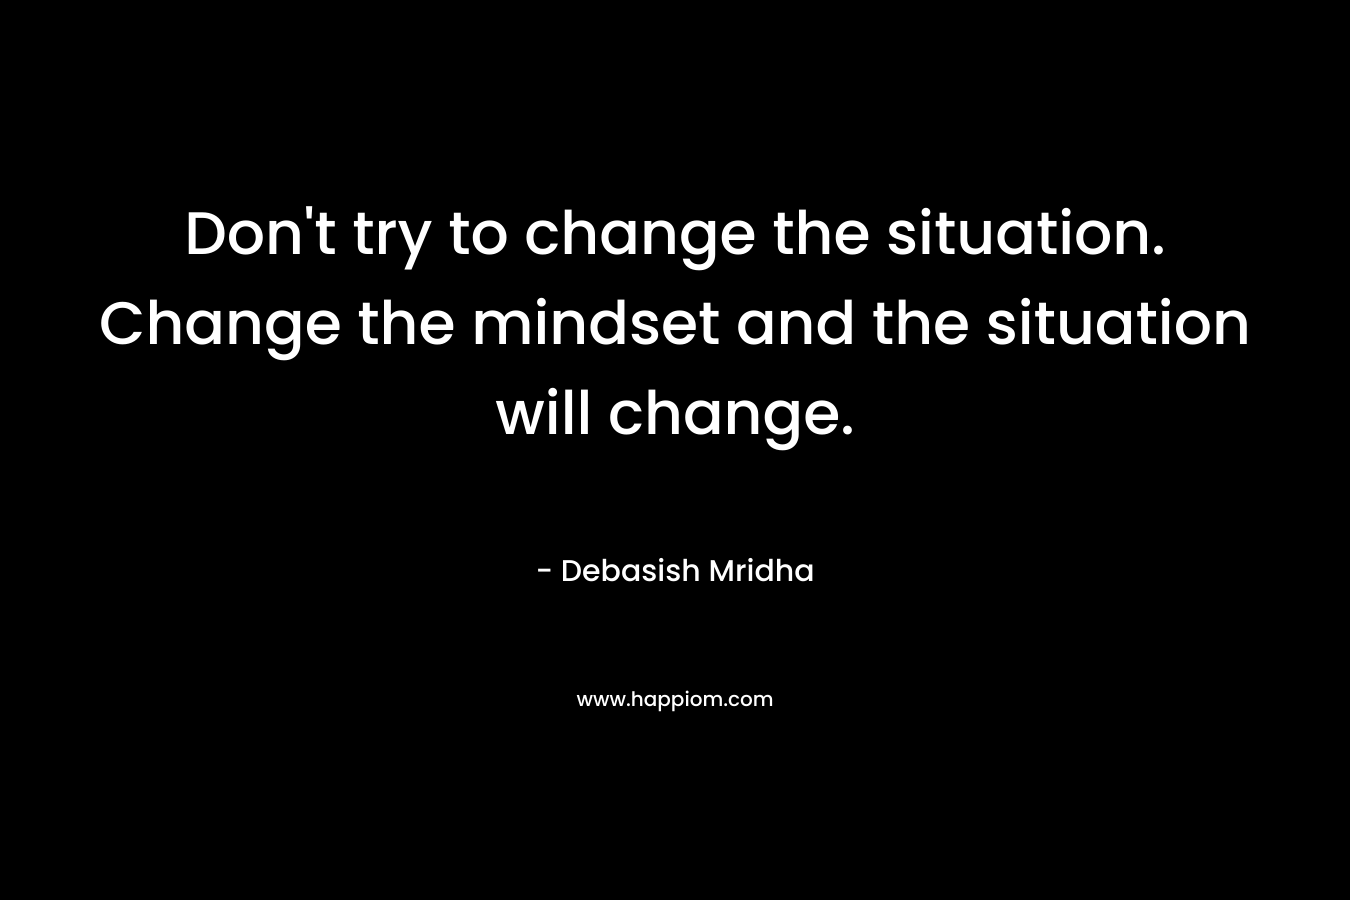 Don't try to change the situation. Change the mindset and the situation will change.